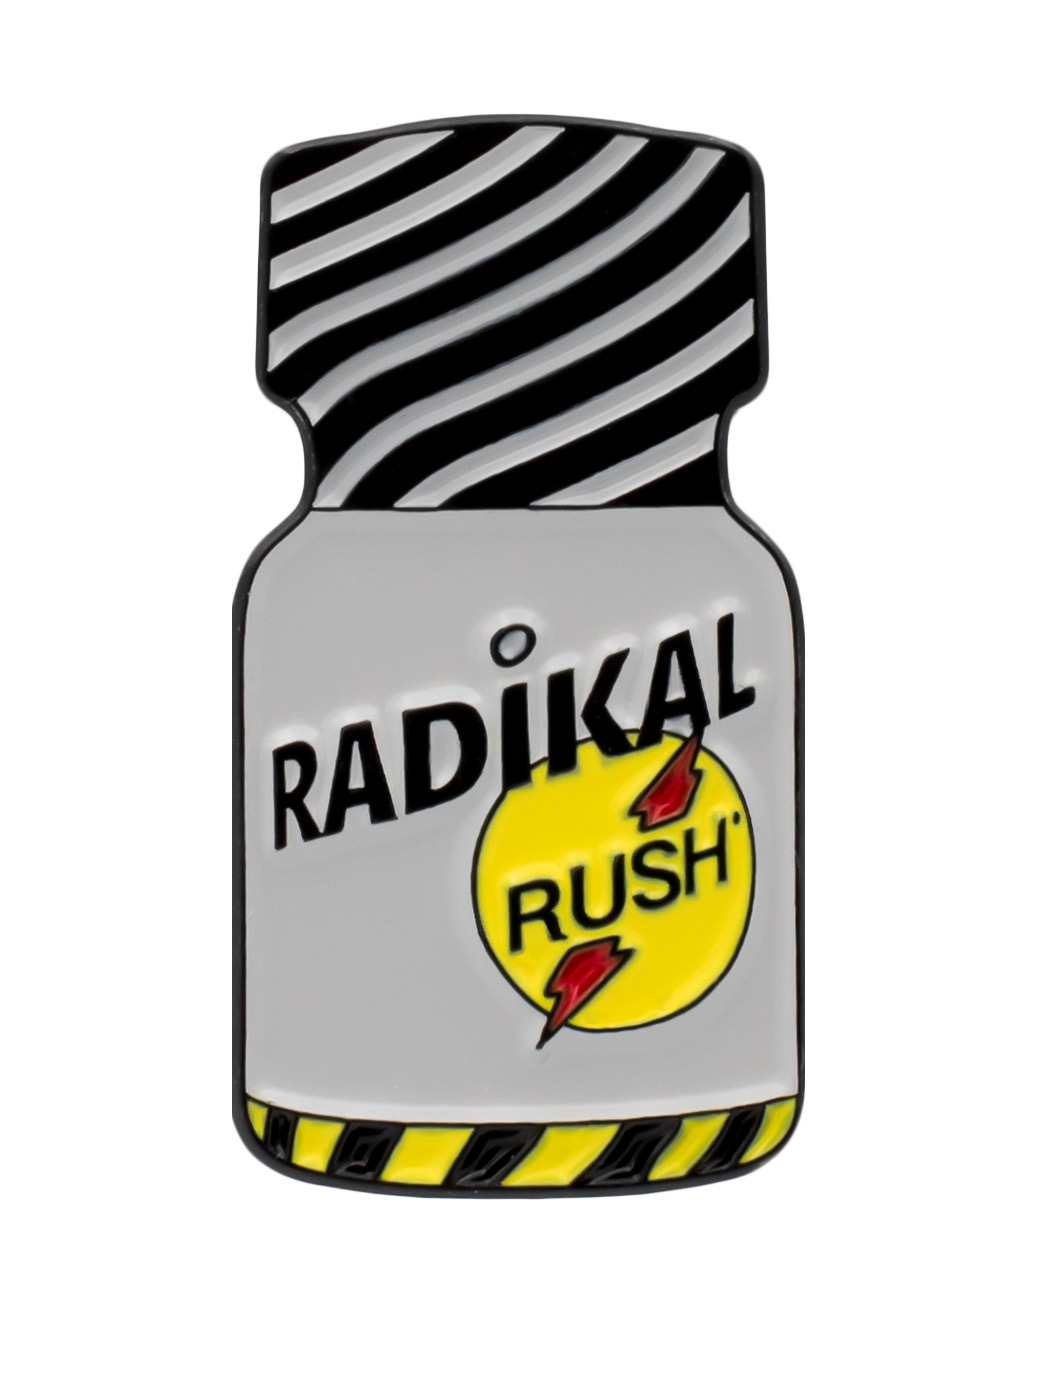 https://www.poppers.be/shop/images/product_images/popup_images/poppers-pin-radikal-rush__1.jpg